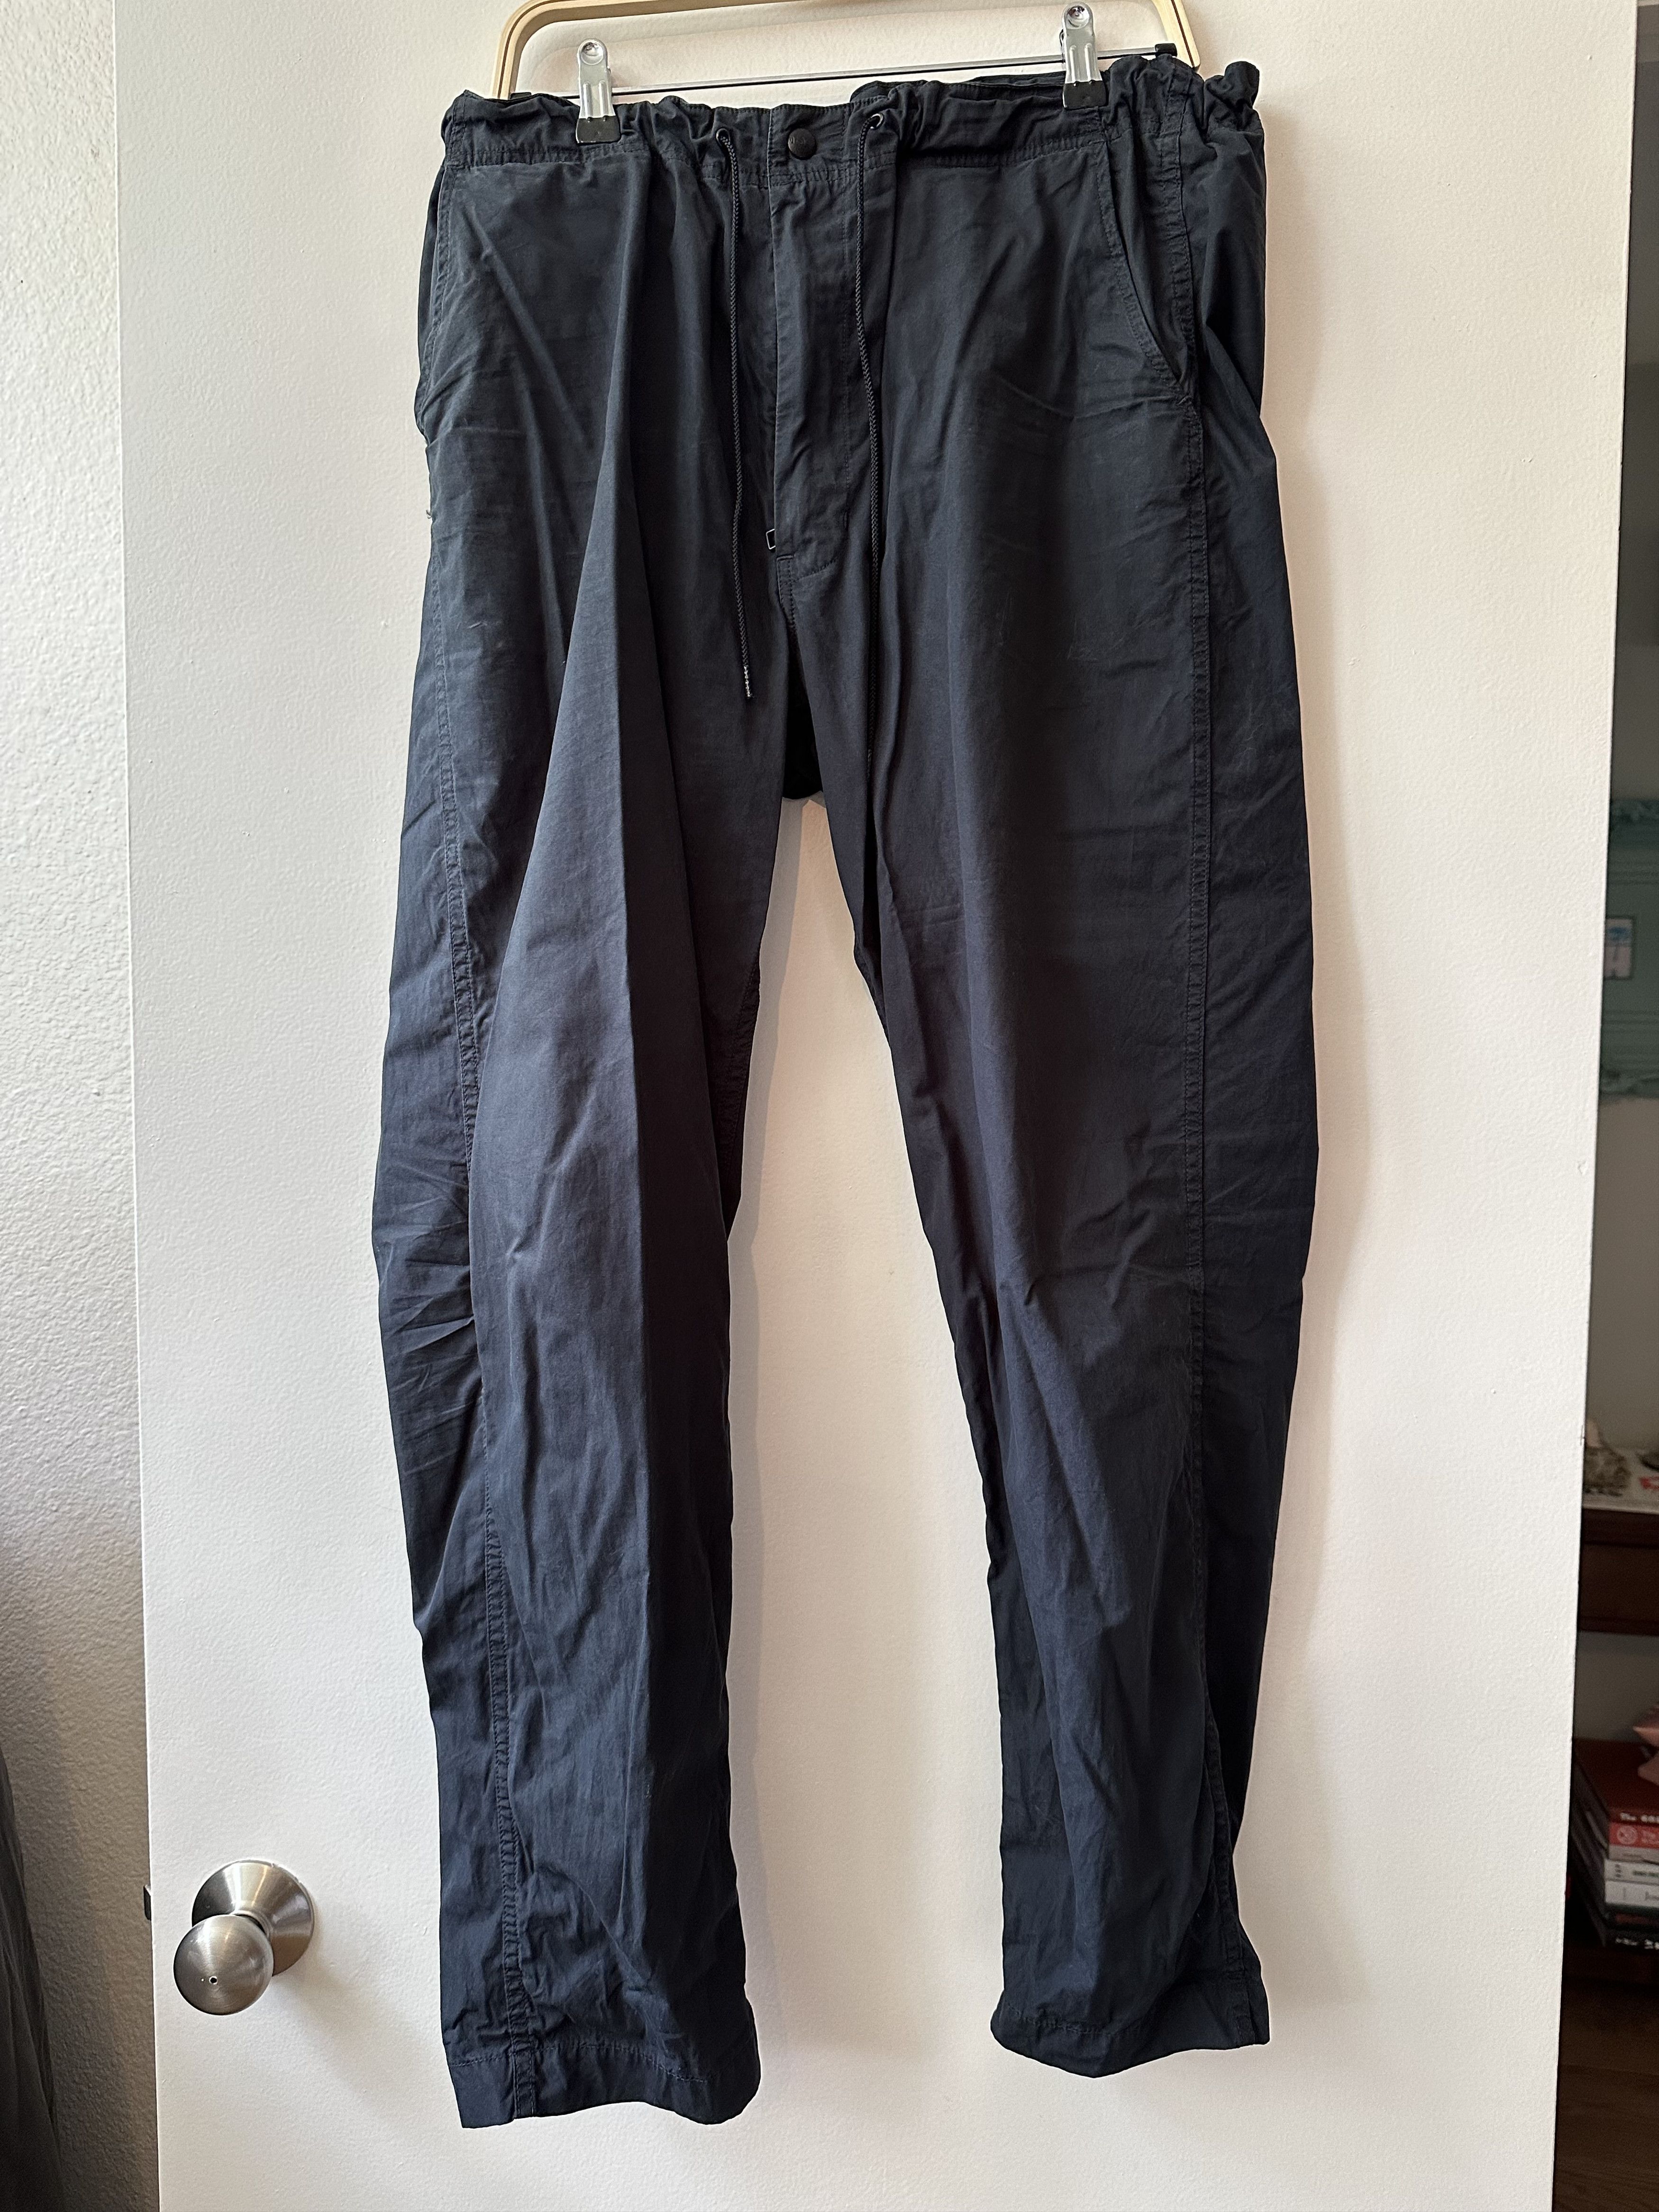 Orslow New Yorker Pants | Grailed